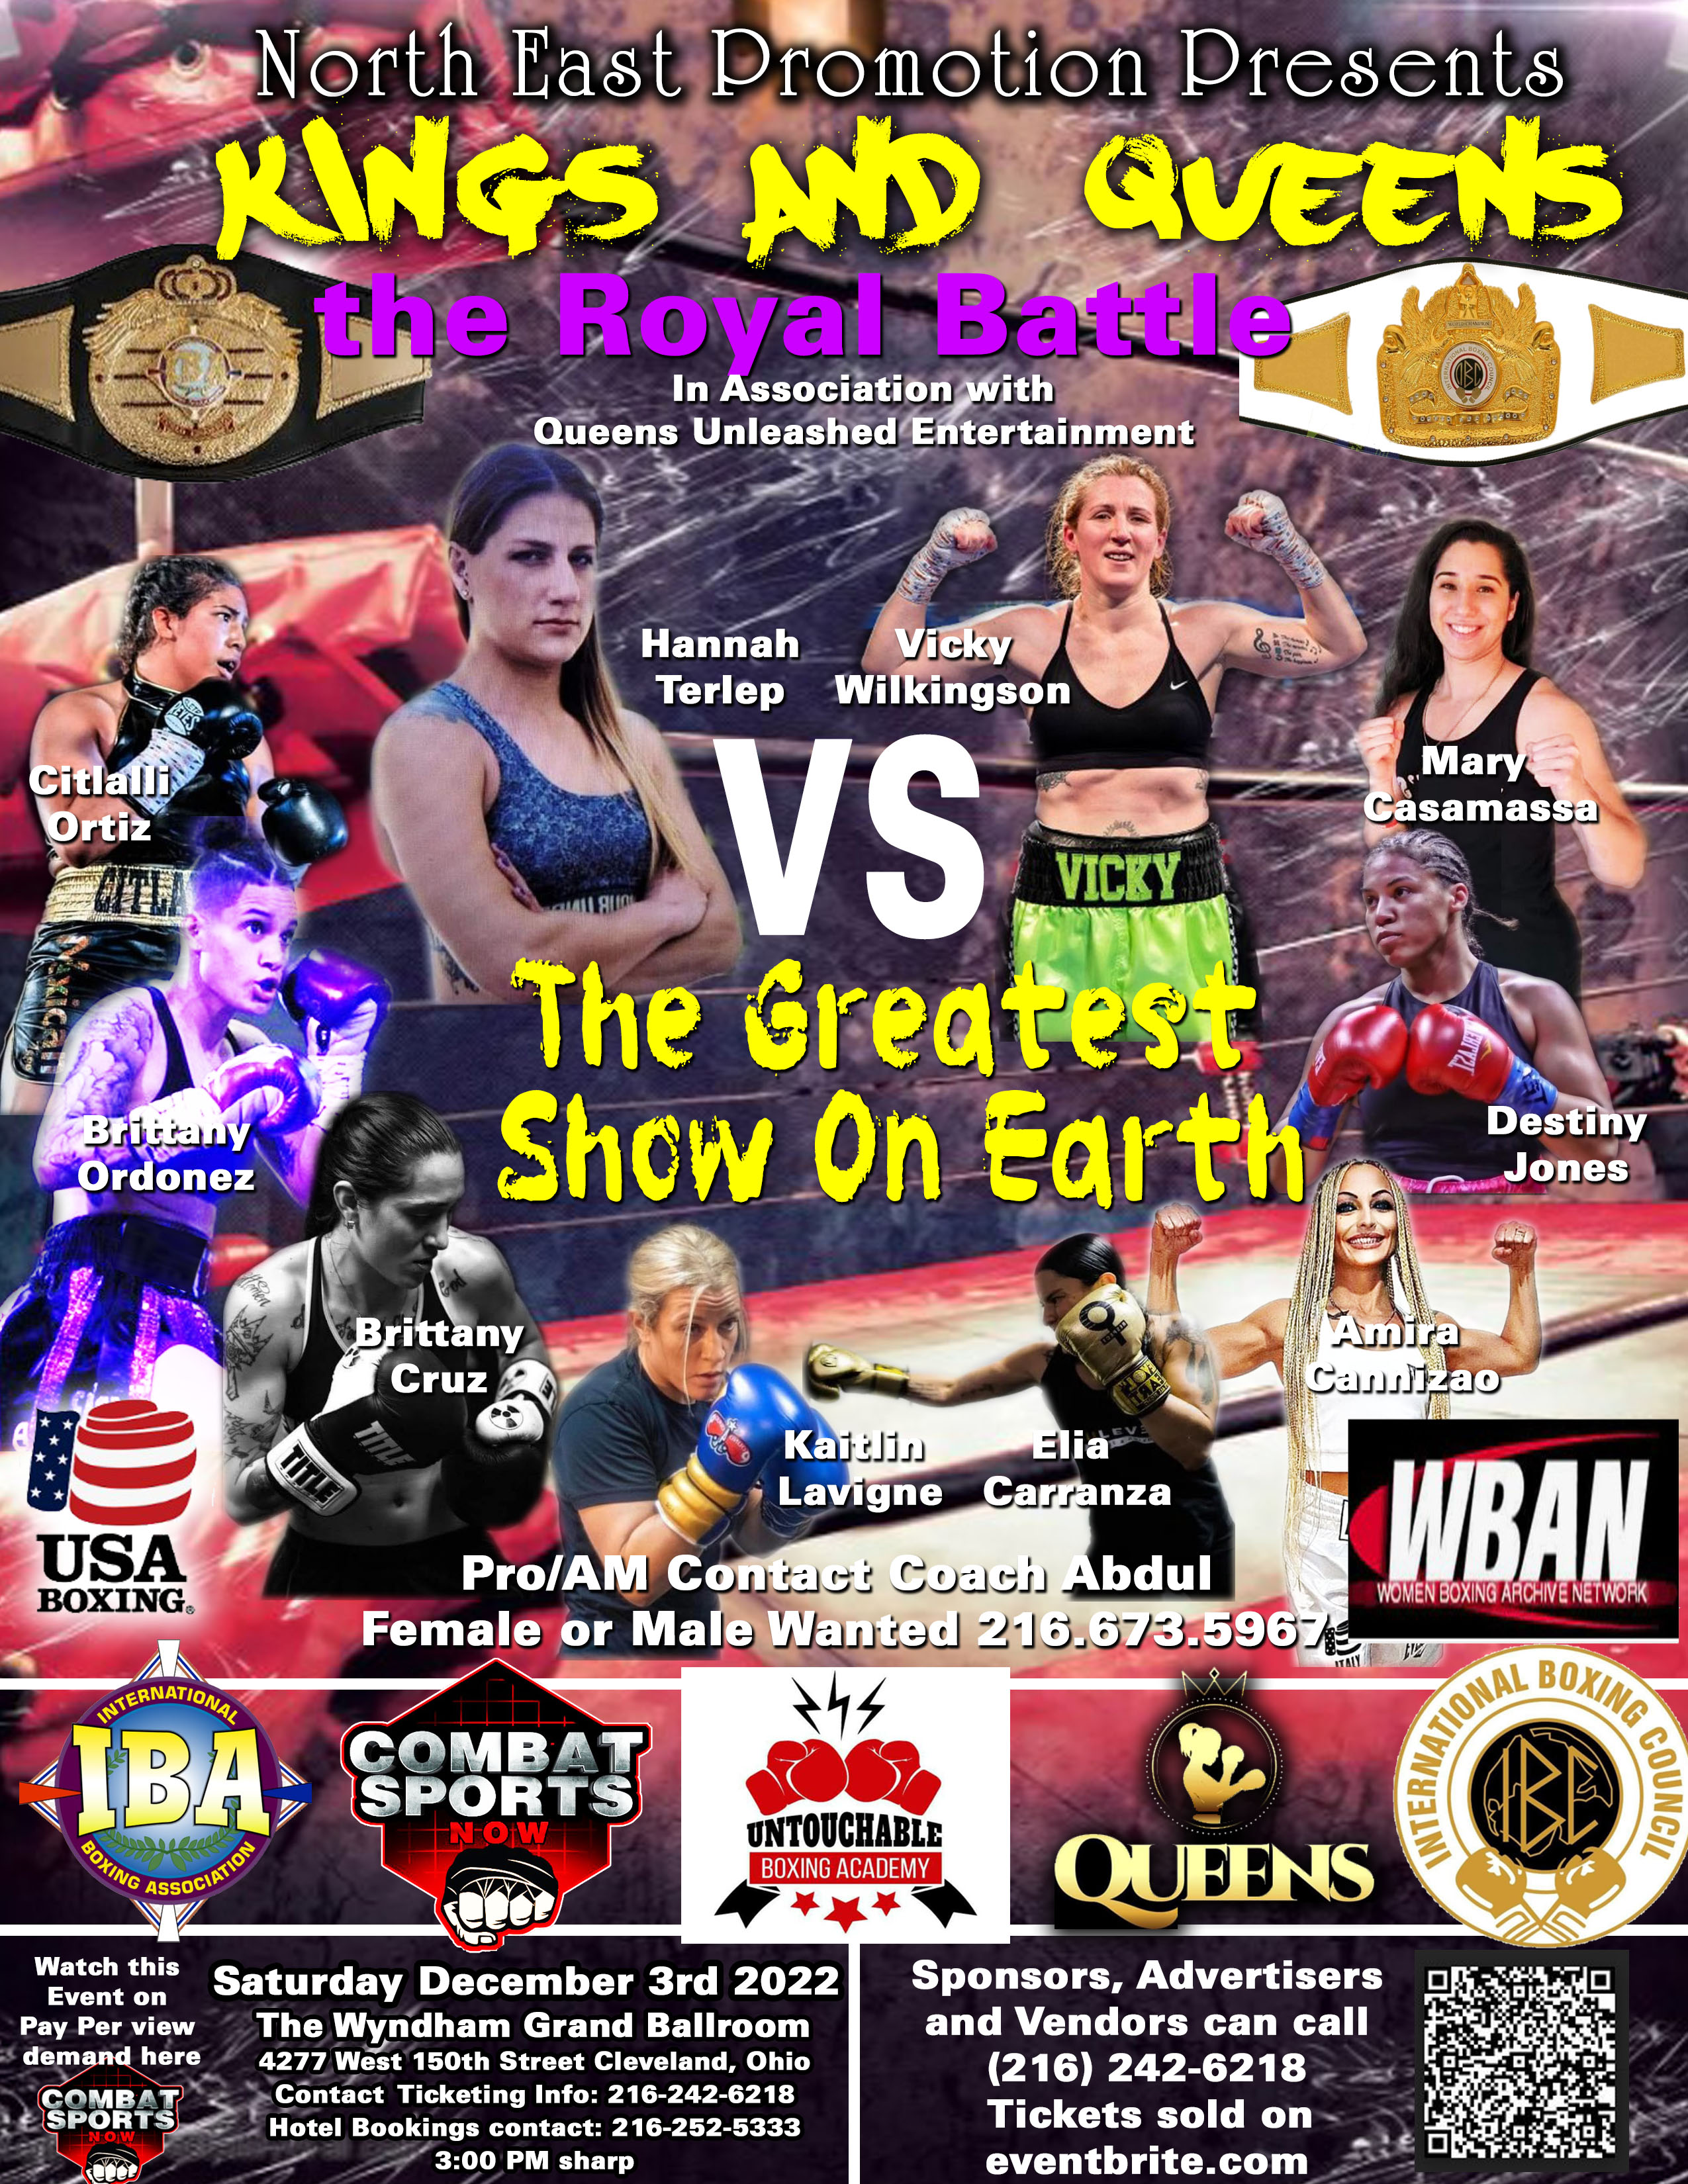 Kings and Queens Battle Royal Live on Combat Sports Now